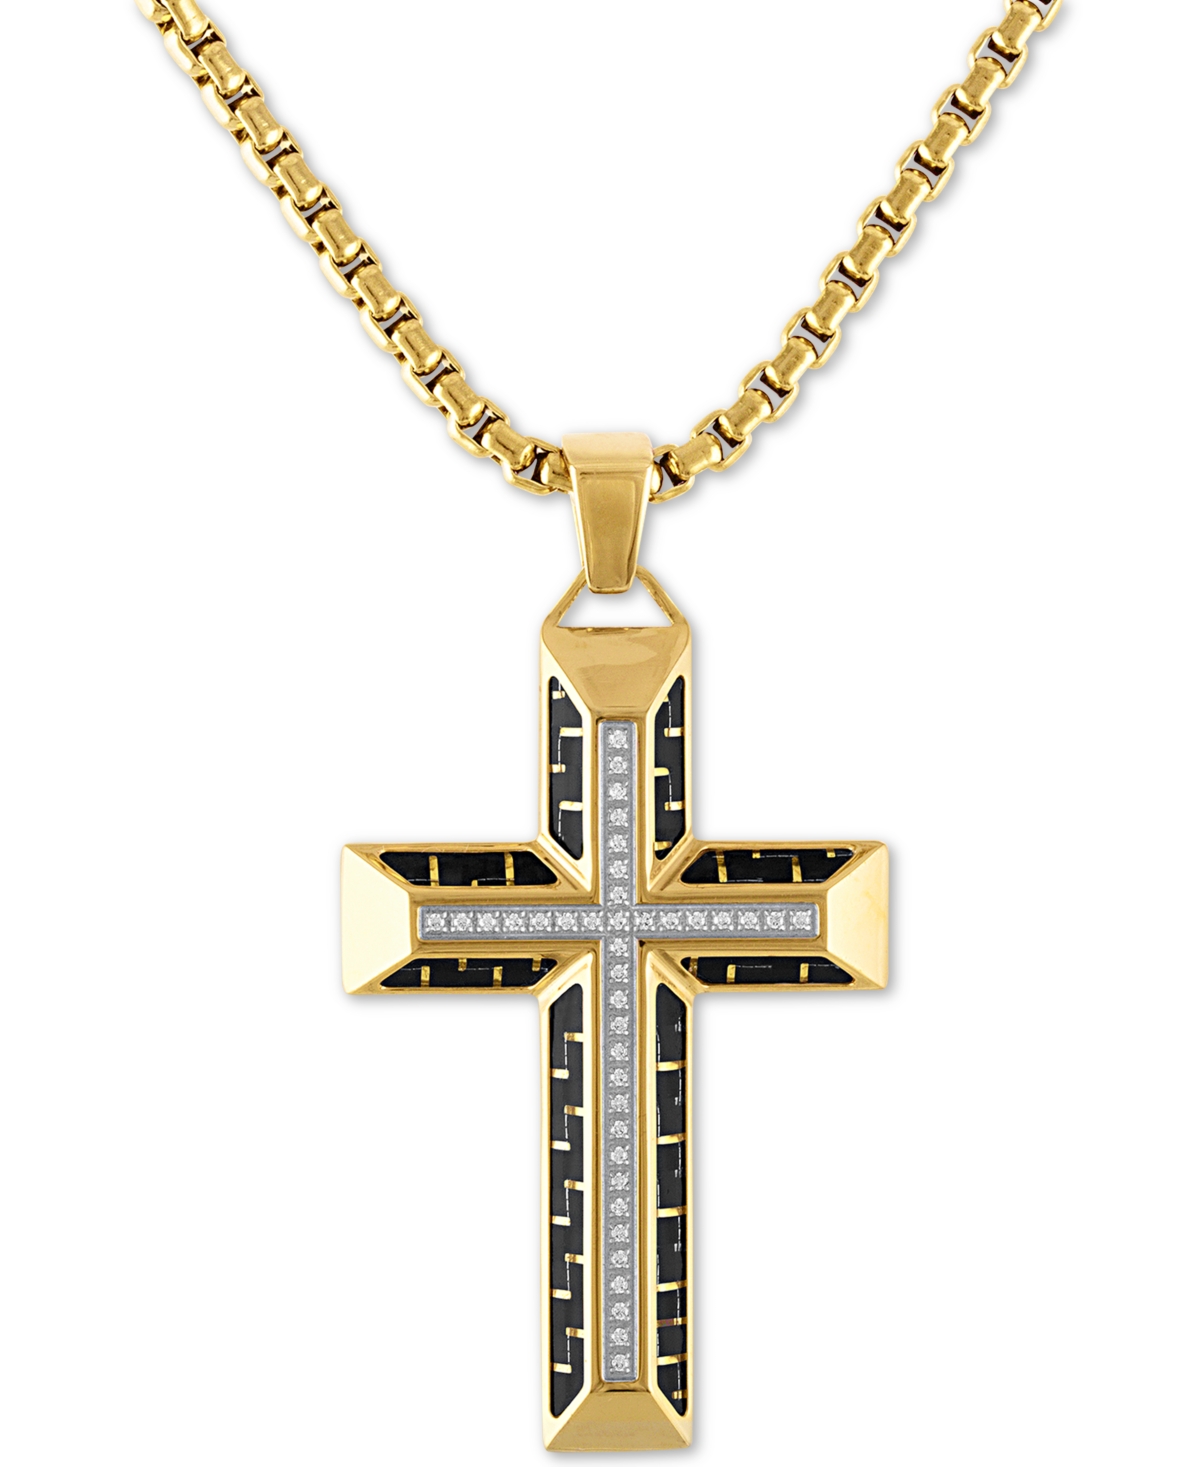 Esquire Men's Jewelry Diamond Cross 22" Pendant Necklace in Gold Tone Ion-Plated Stainless Steel & Black Carbon Fiber, Created for Macy's (Also in Black Ion Plated Stainless Steel)